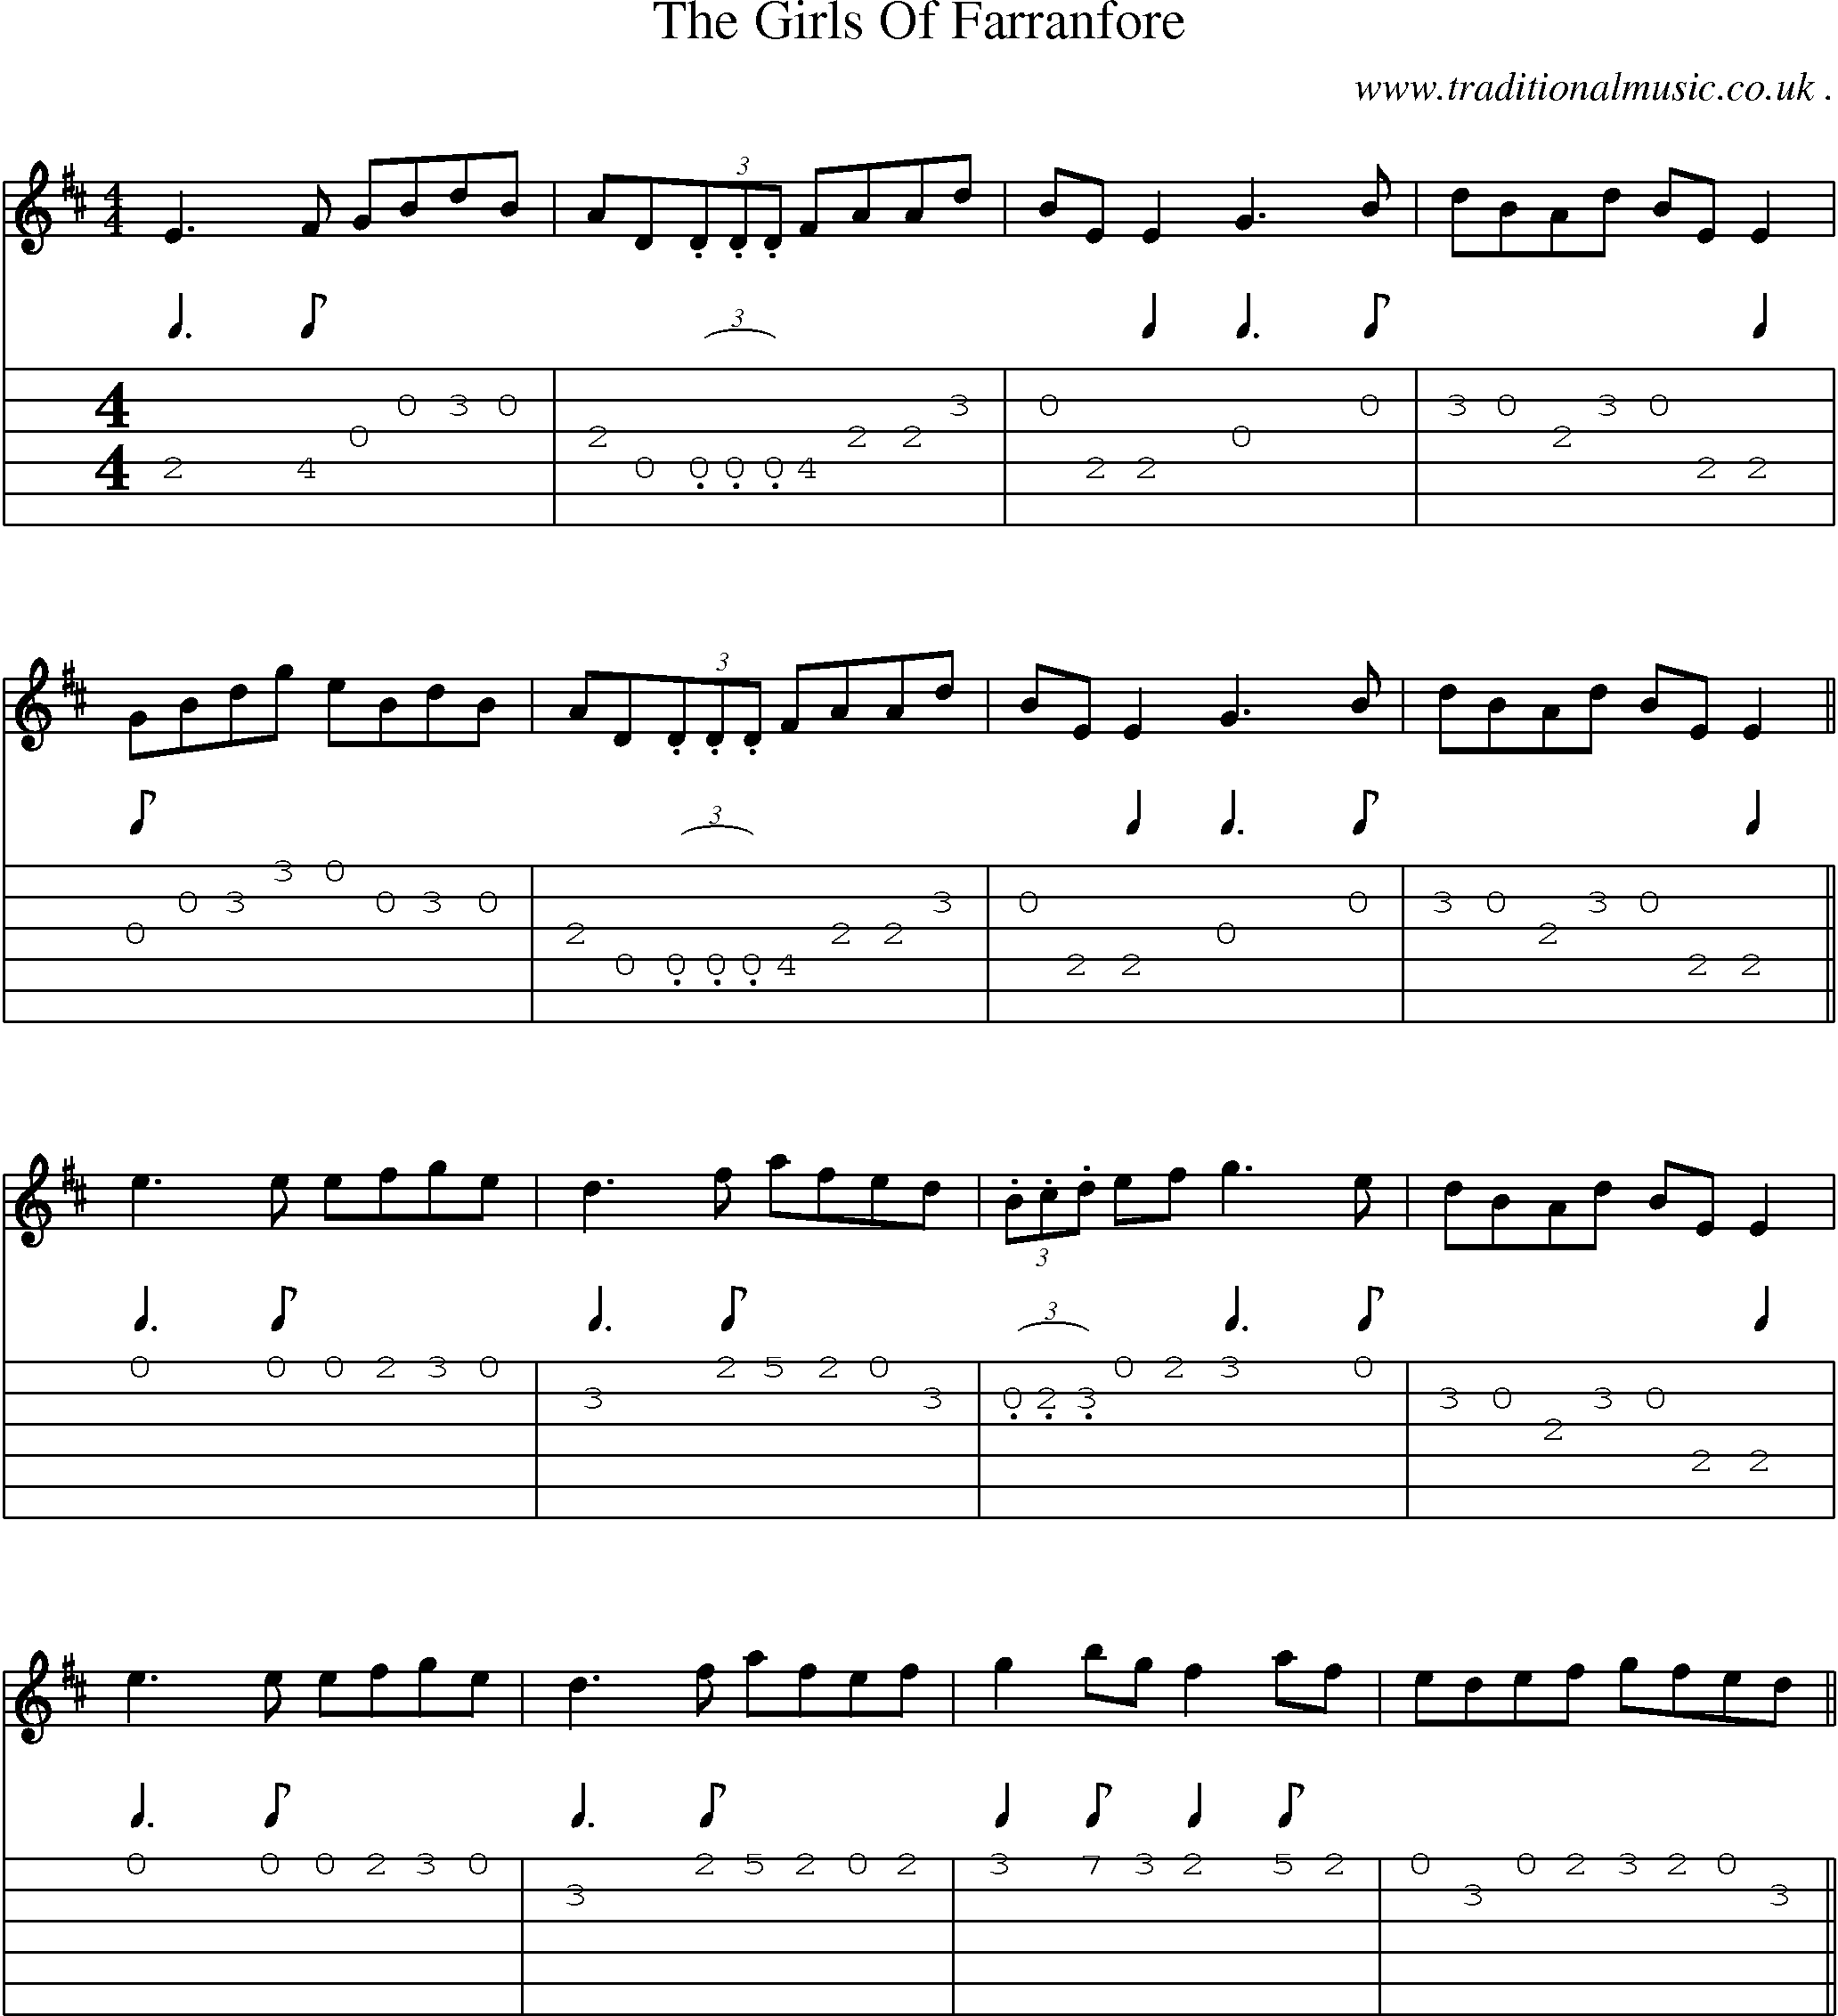 Sheet-Music and Guitar Tabs for The Girls Of Farranfore